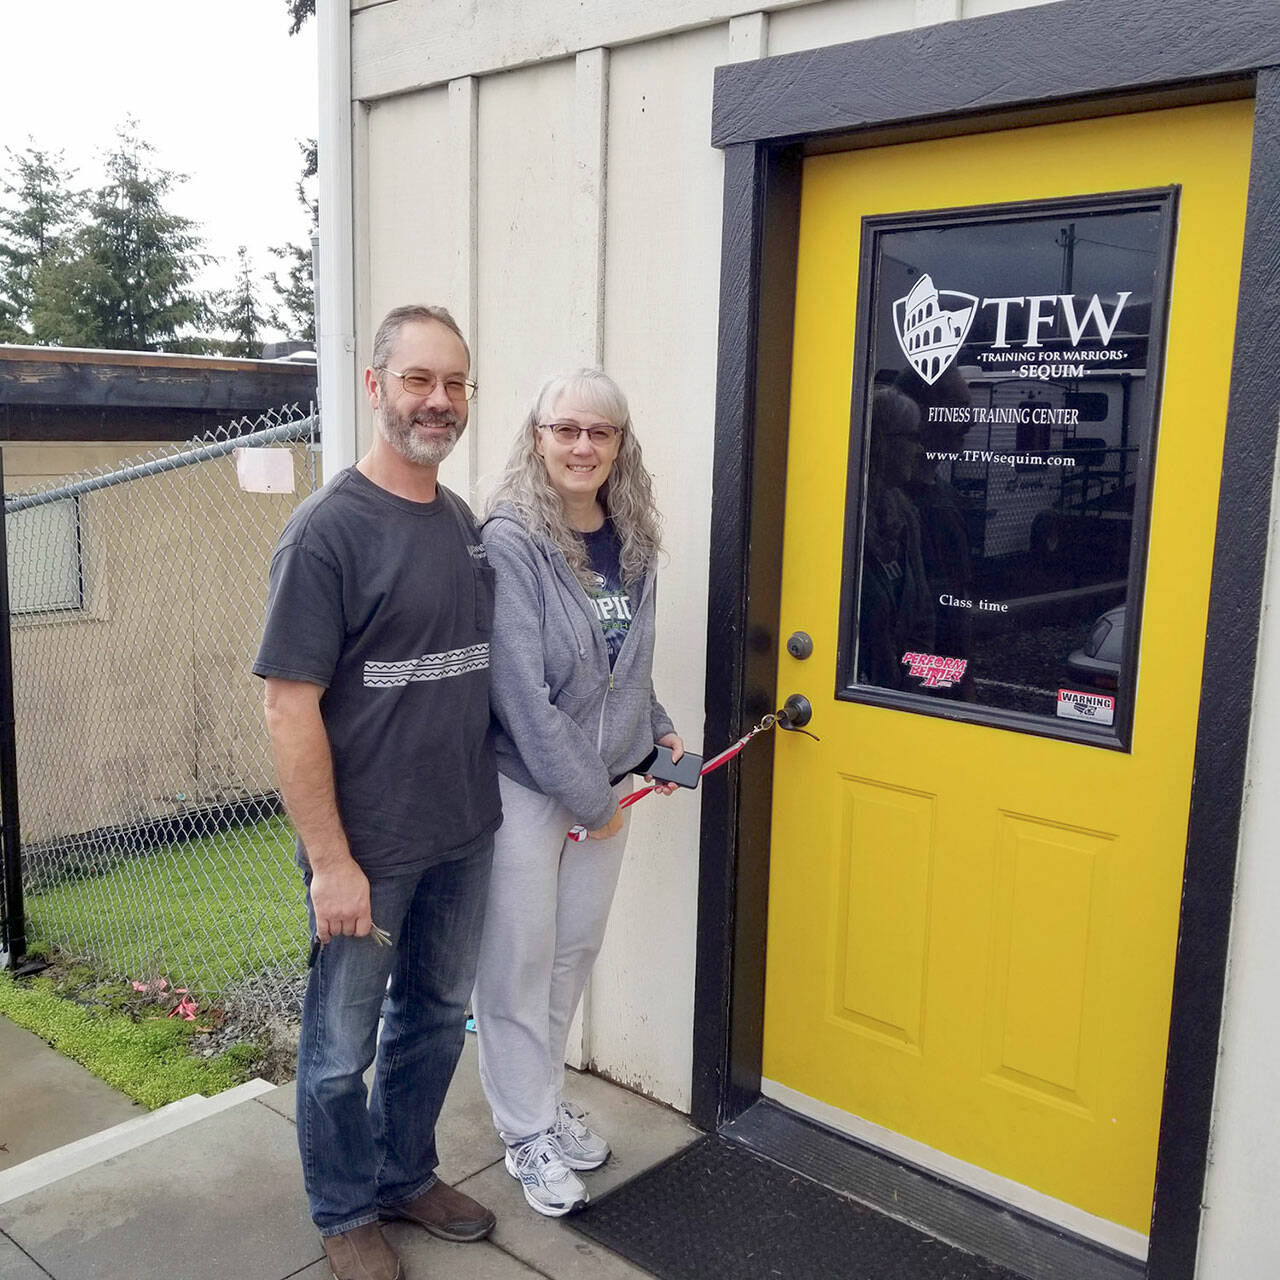 John and Talece Graham, of Sequim, have purchased the TFW Training for Warriors gym from Kenny Hall.